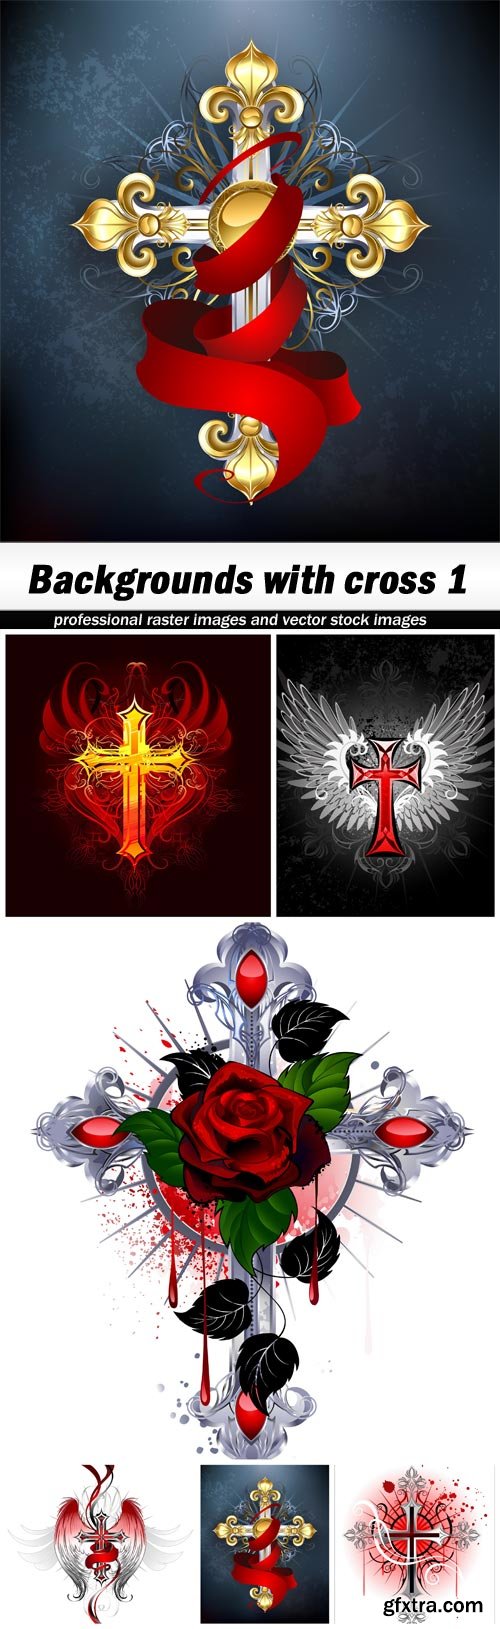 Backgrounds with cross 1 - 6 UHQ JPEG